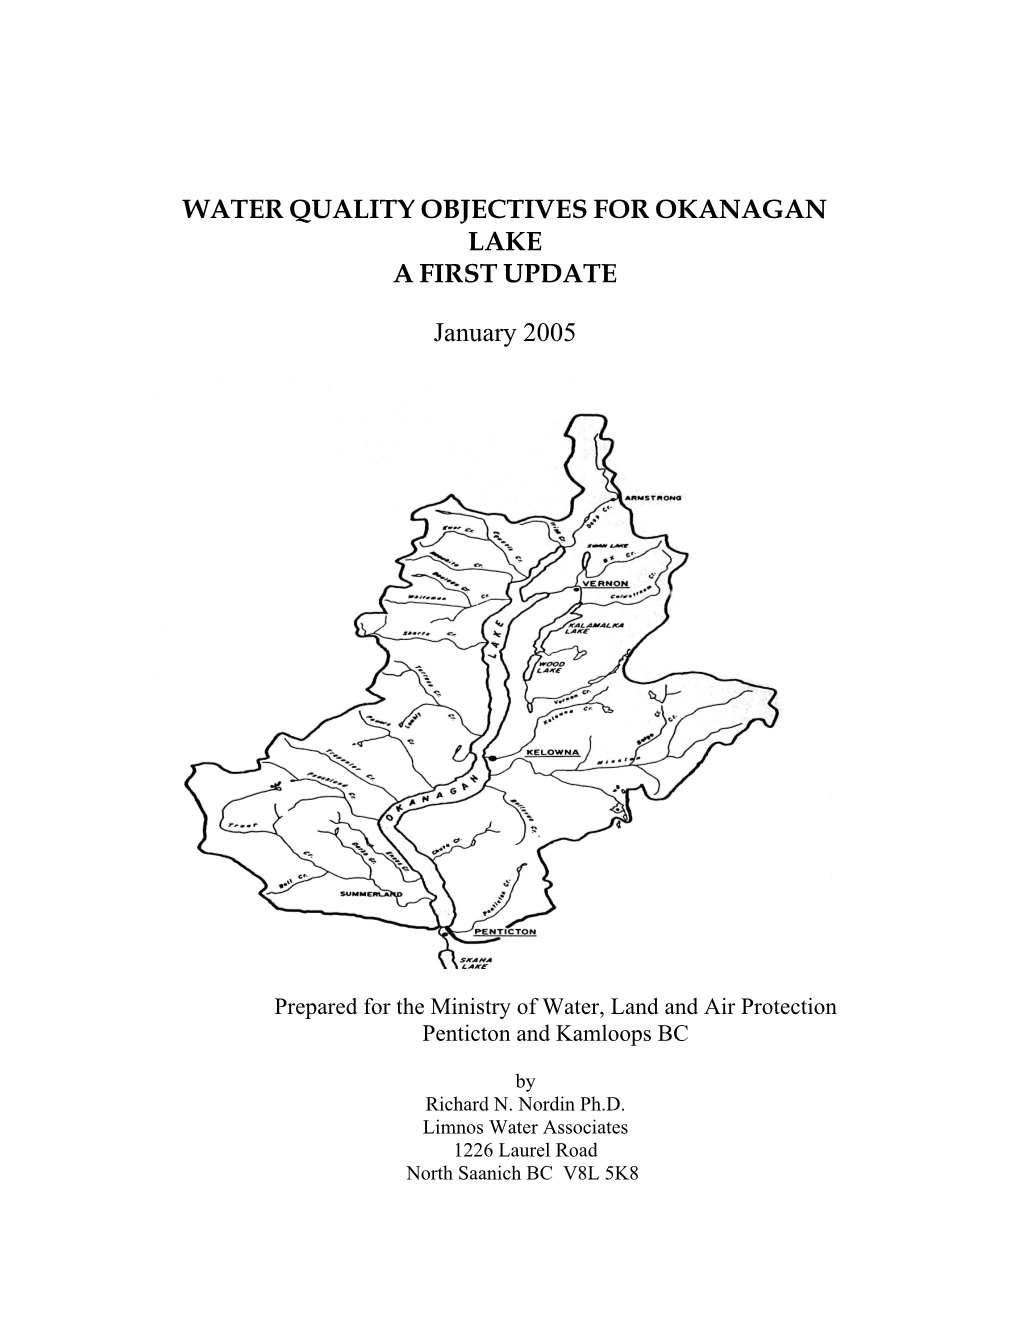 Okanagan Lake Water Quality Objectives First Update